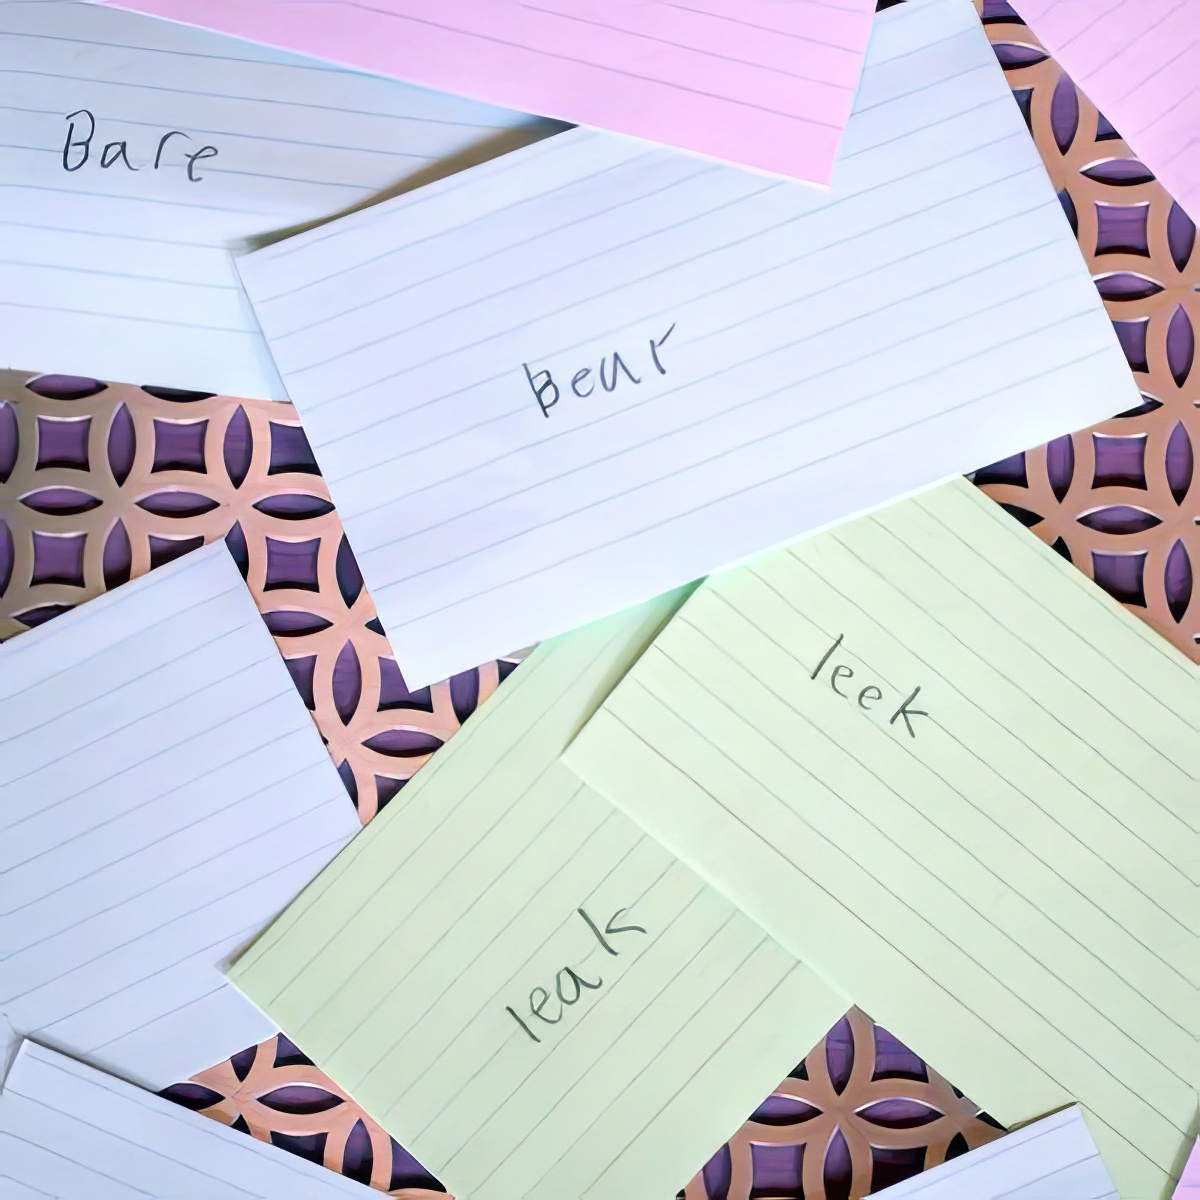 DIY sight words flashcards for the win!
Have fun and learn at no cost at all!